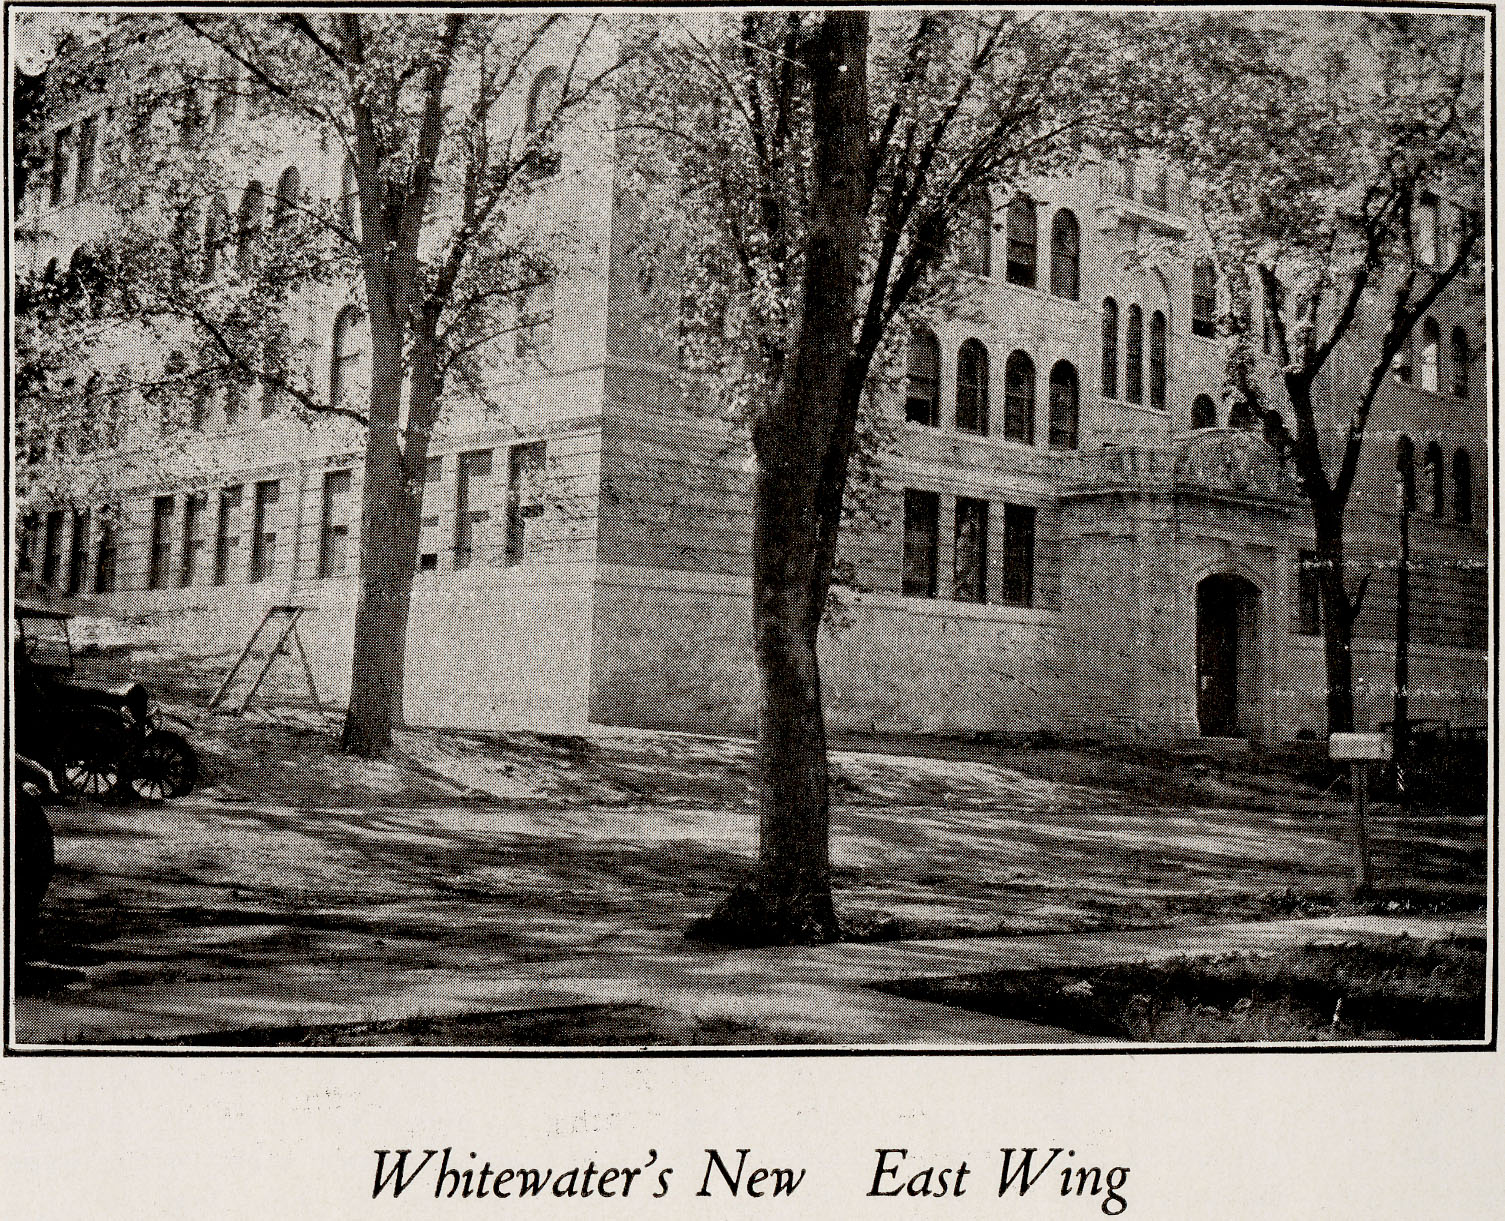 Whitewater's new east wing